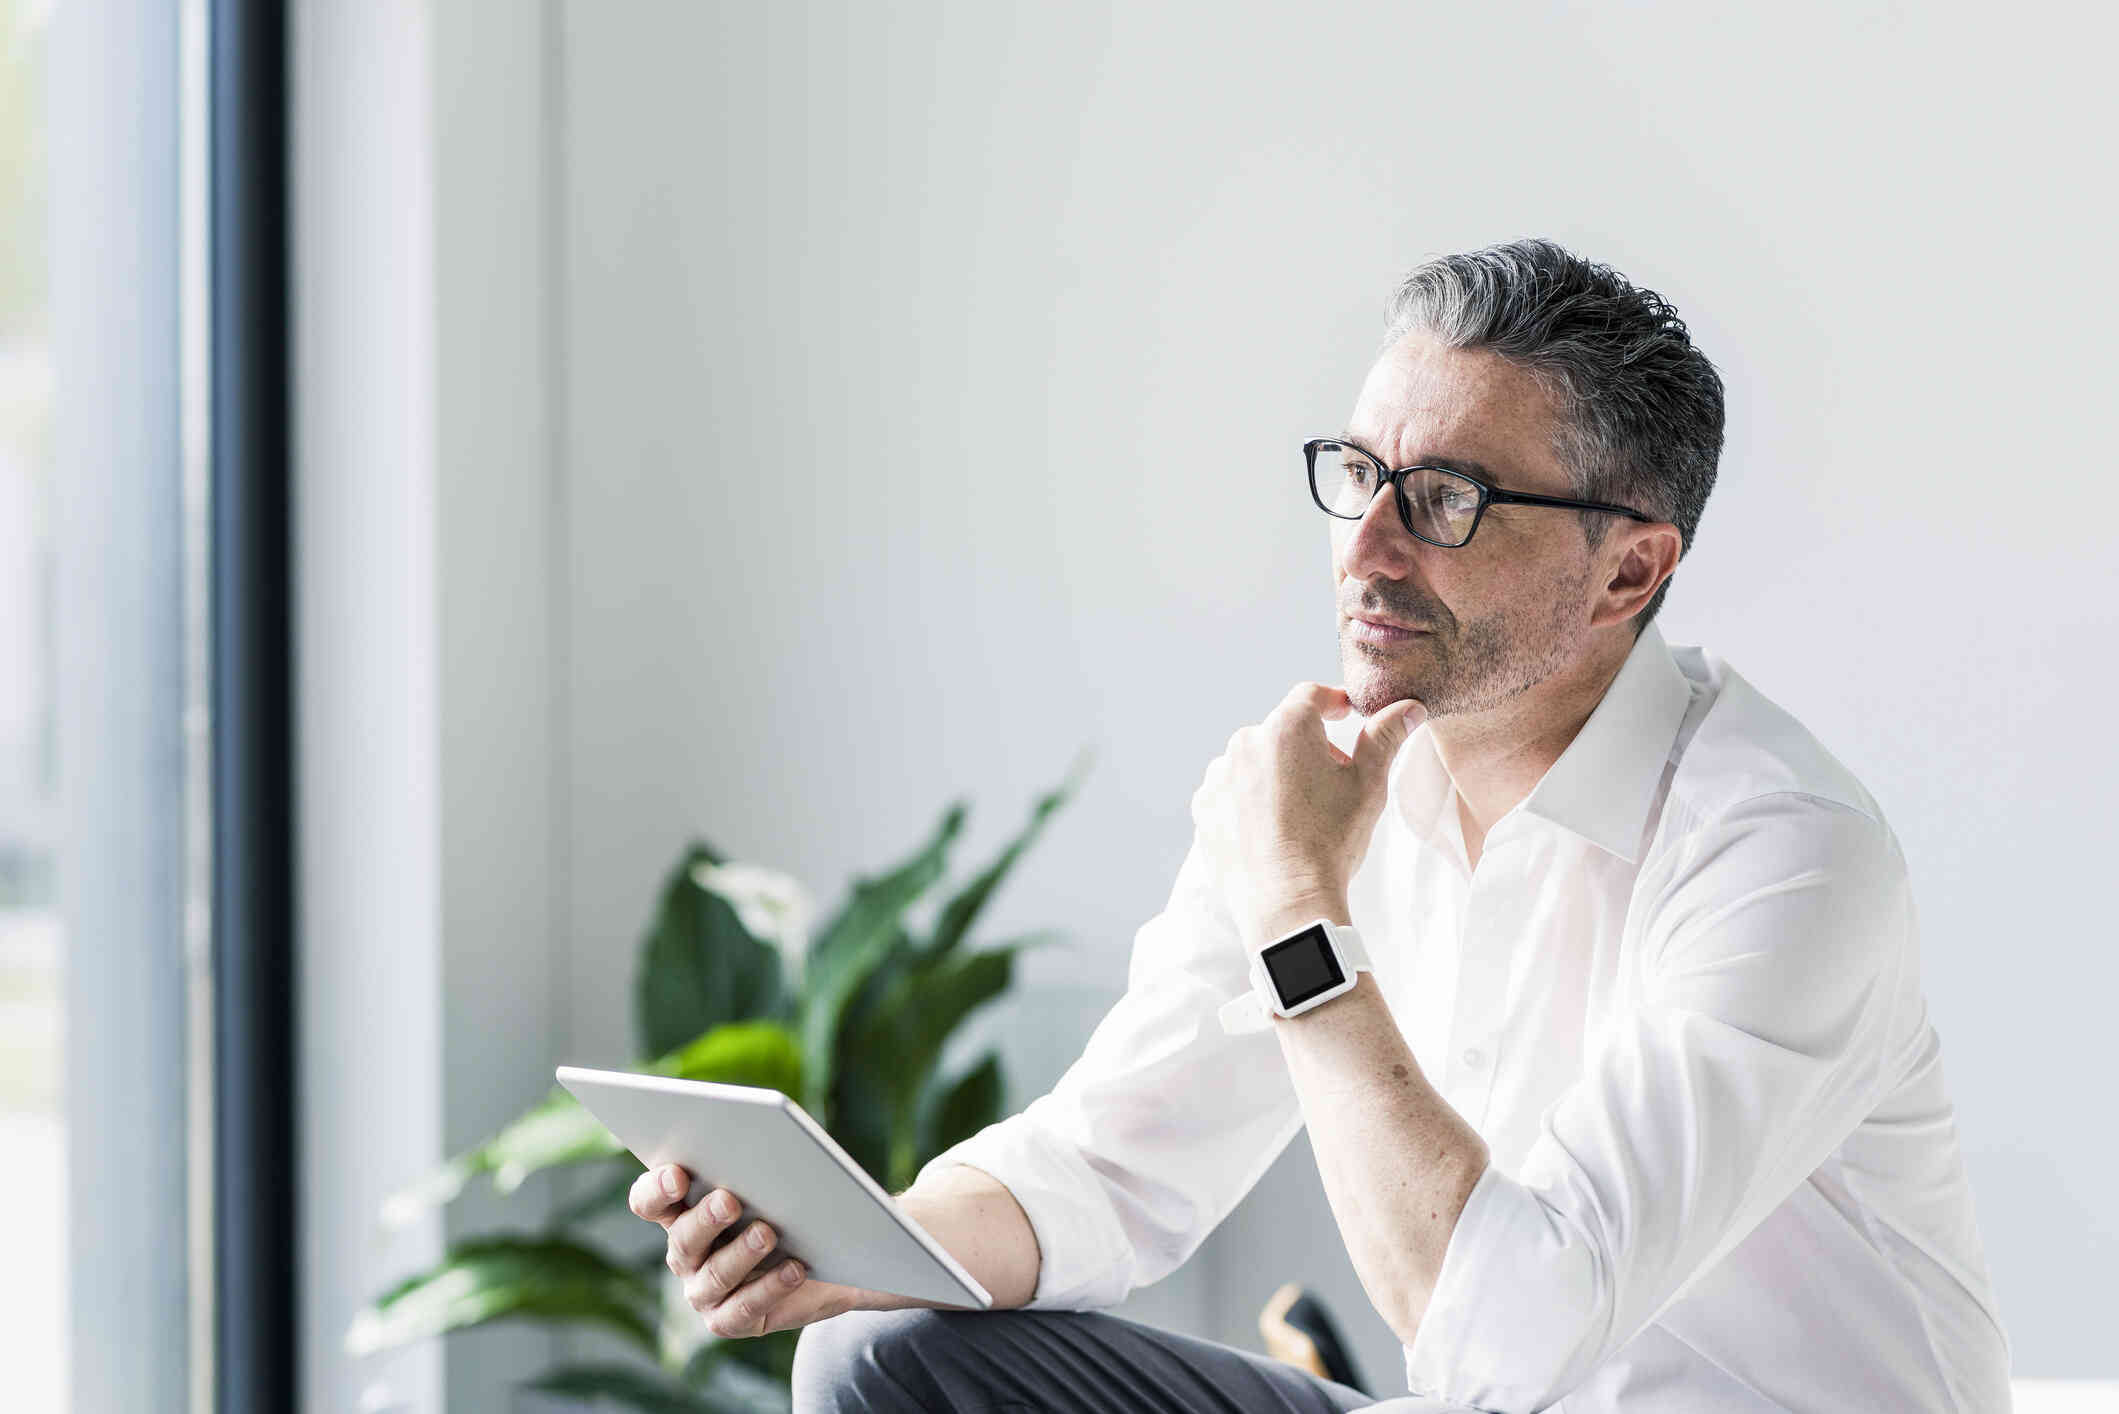 A middle aged man in a white button down shirt slooks deep in thought as he sits with a tablet in his hand.